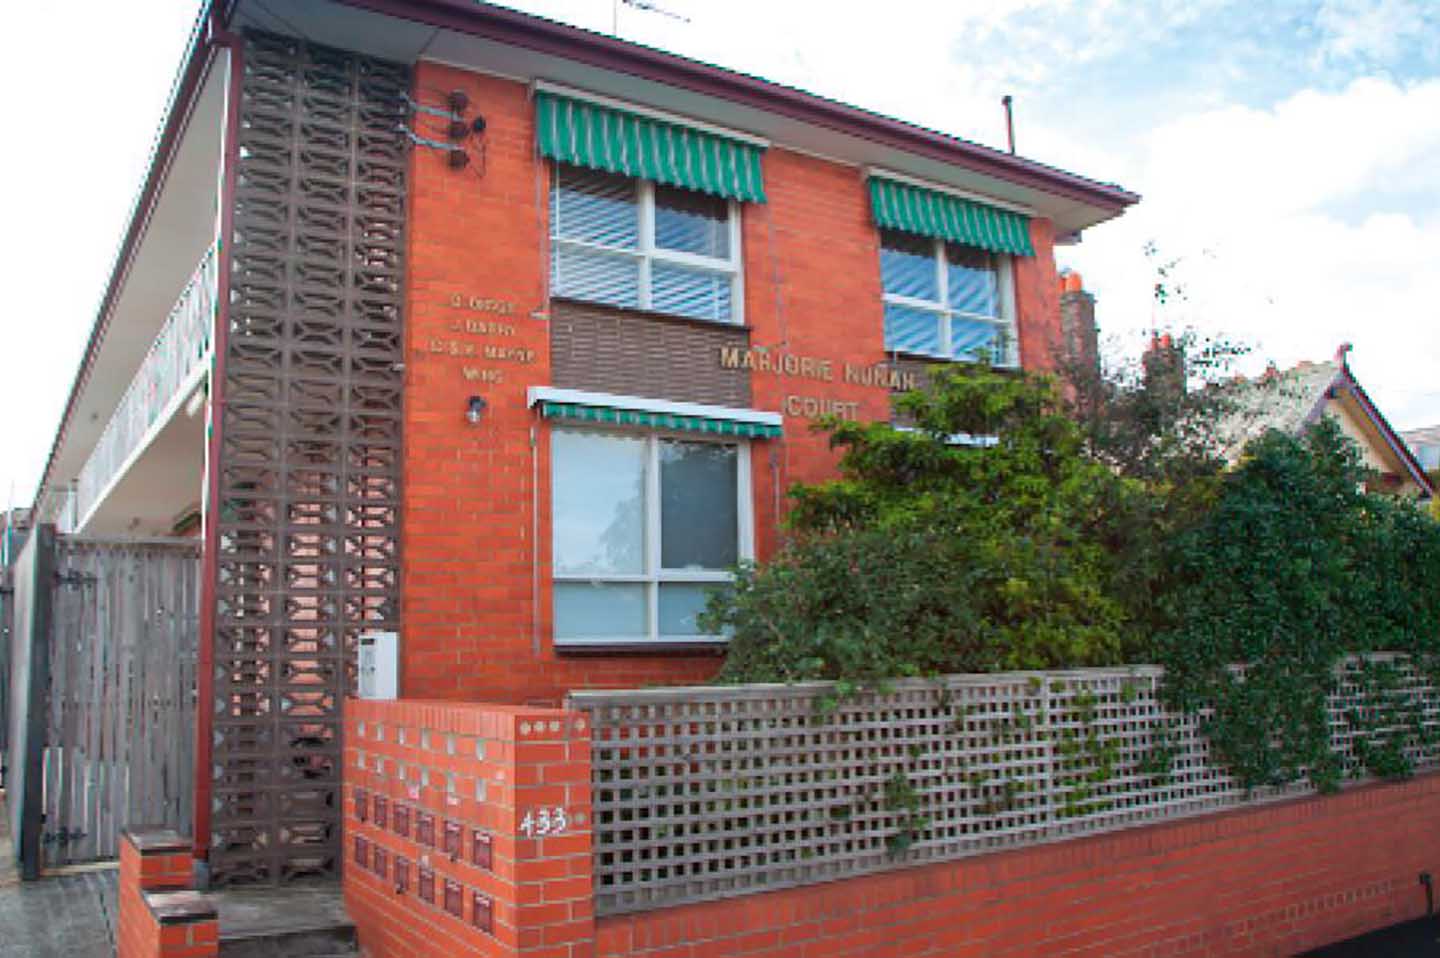 The building where the apartment is located is a residential aged care facility.